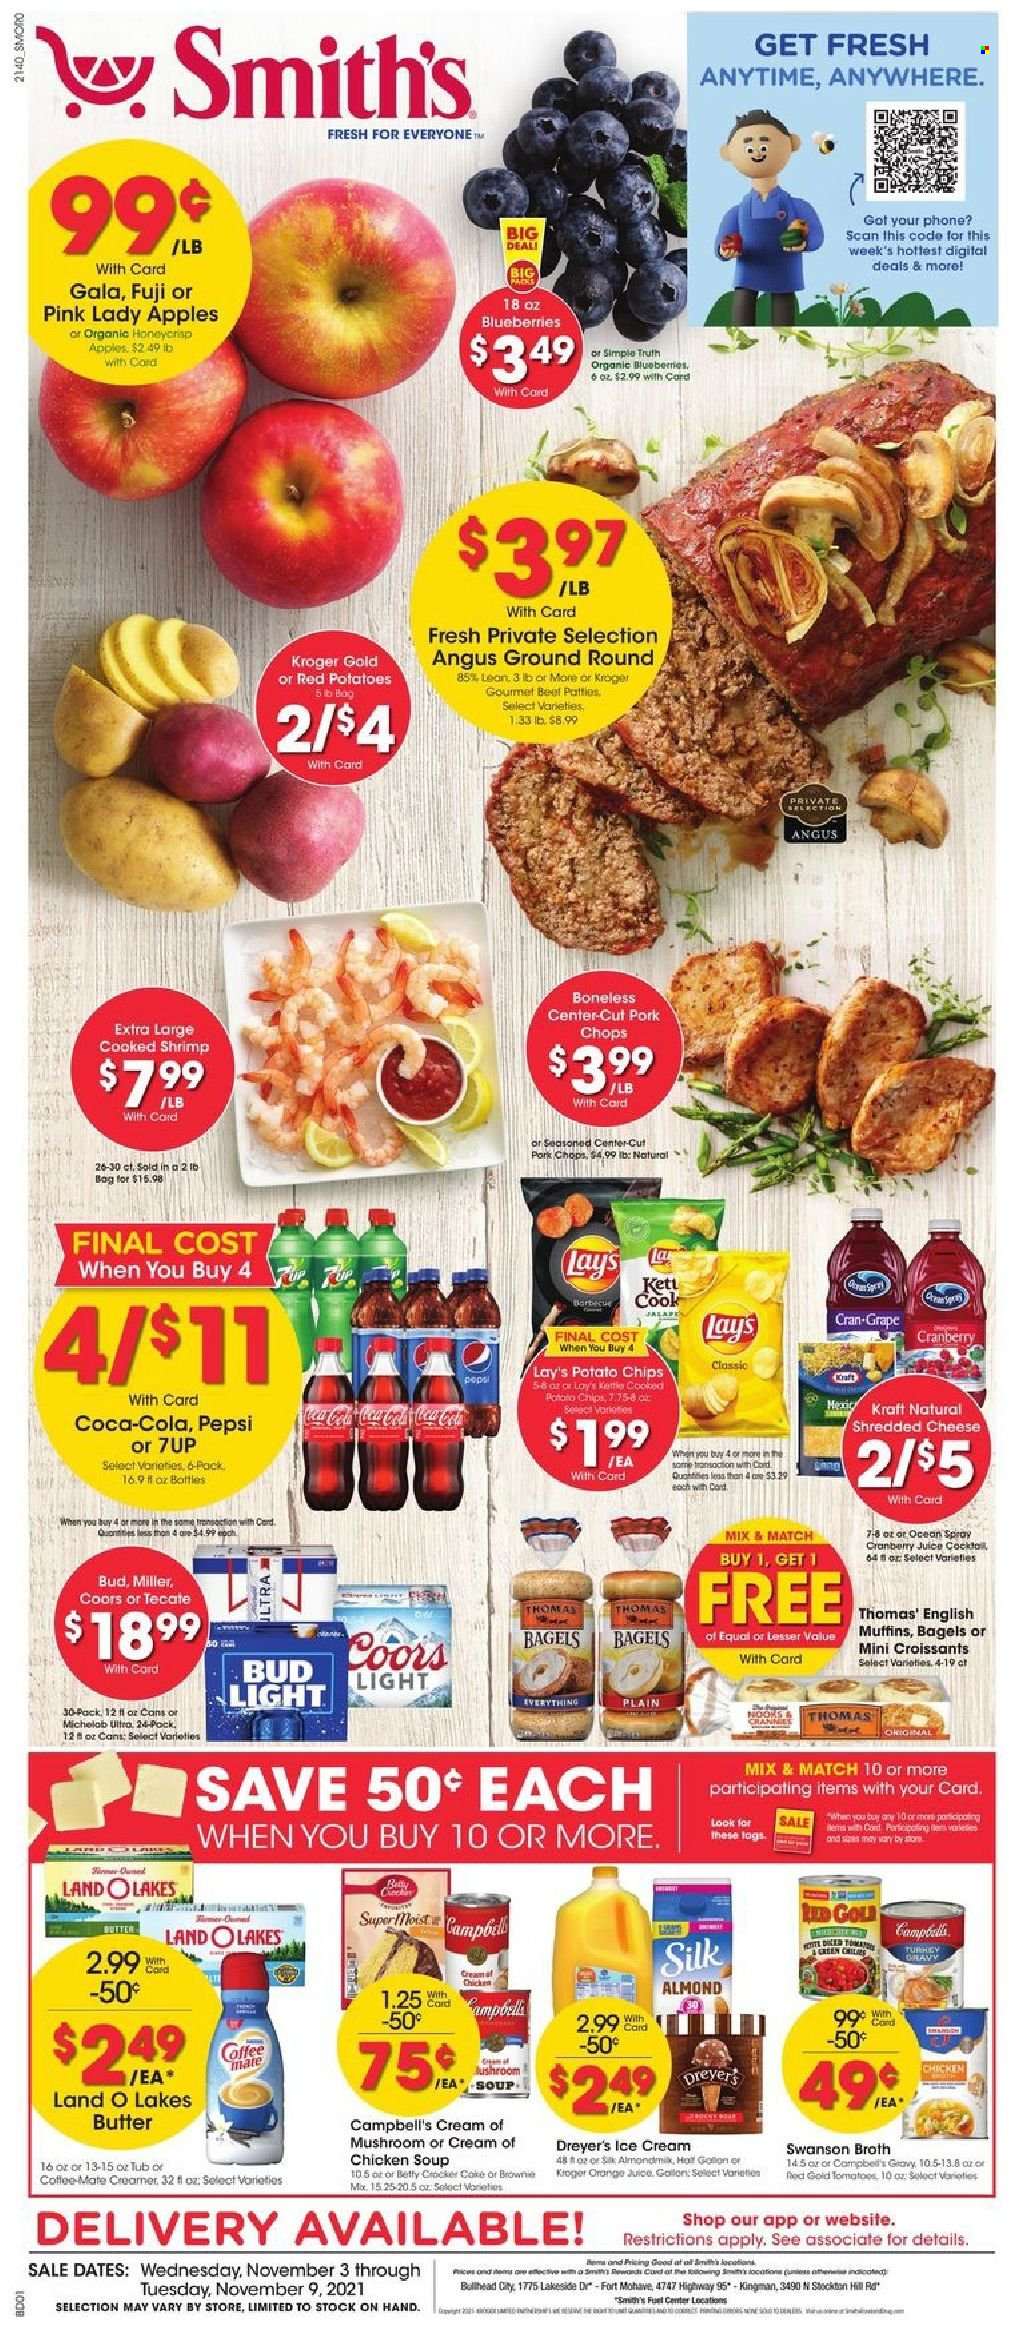 thumbnail - Smith's Flyer - 11/03/2021 - 11/09/2021 - Sales products - bagels, english muffins, croissant, brownies, red potatoes, apples, blueberries, Gala, Pink Lady, shrimps, Campbell's, chicken soup, soup, Kraft®, shredded cheese, Coffee-Mate, Silk, butter, creamer, ice cream, potato chips, chips, Lay’s, Smith's, broth, Coca-Cola, Pepsi, juice, 7UP, Cran-Grape, beer, Miller, Coors. Page 1.